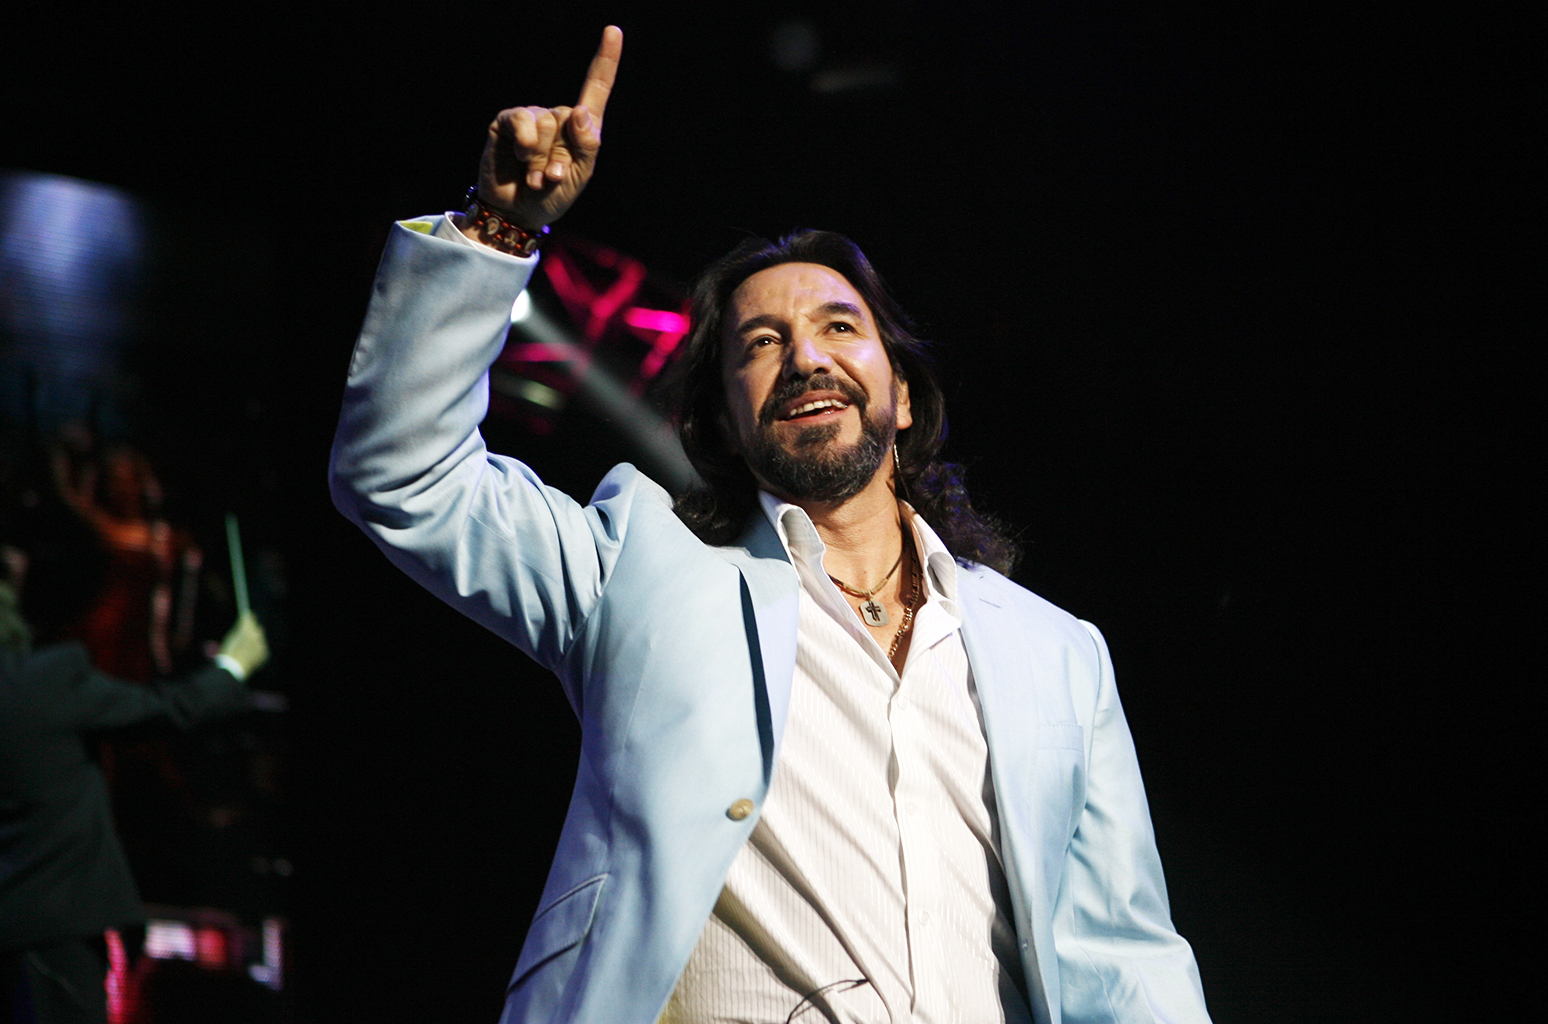 Marco Antonio Solis performs during  the Juntos En Concierto, which translates to Together In Concert, event featuring Marc Anthony at Madison Square Garden, Wednesday, Aug. 9, 2006, in New York. (AP Photo/Jason DeCrow)